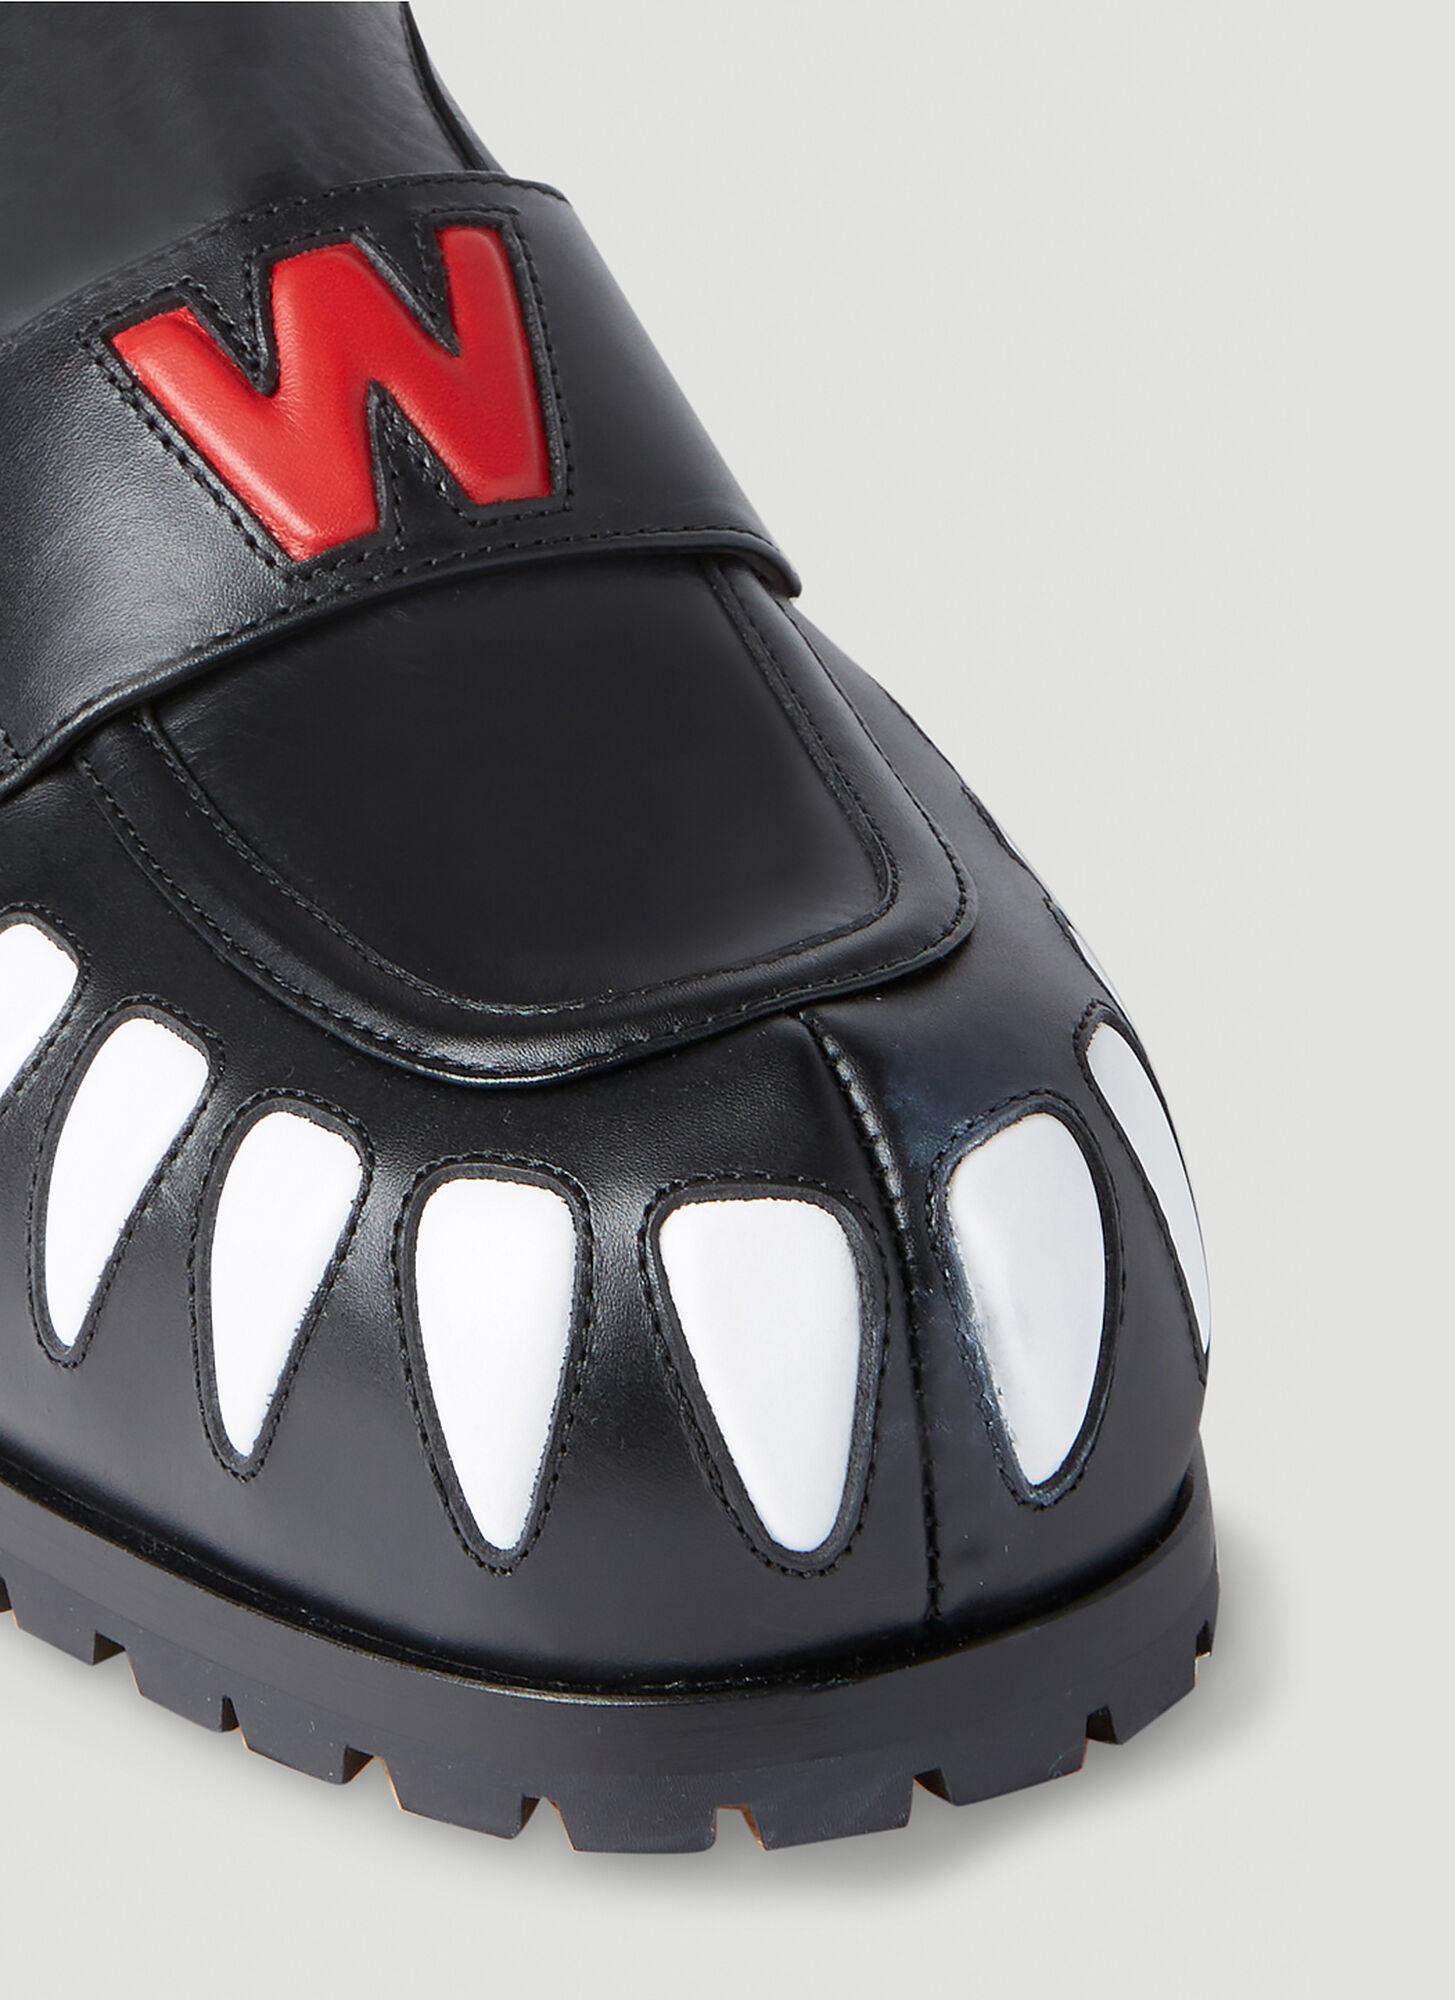 Walter van Beirendonck, shoes  Funky shoes, Cute shoes, Outfit accessories